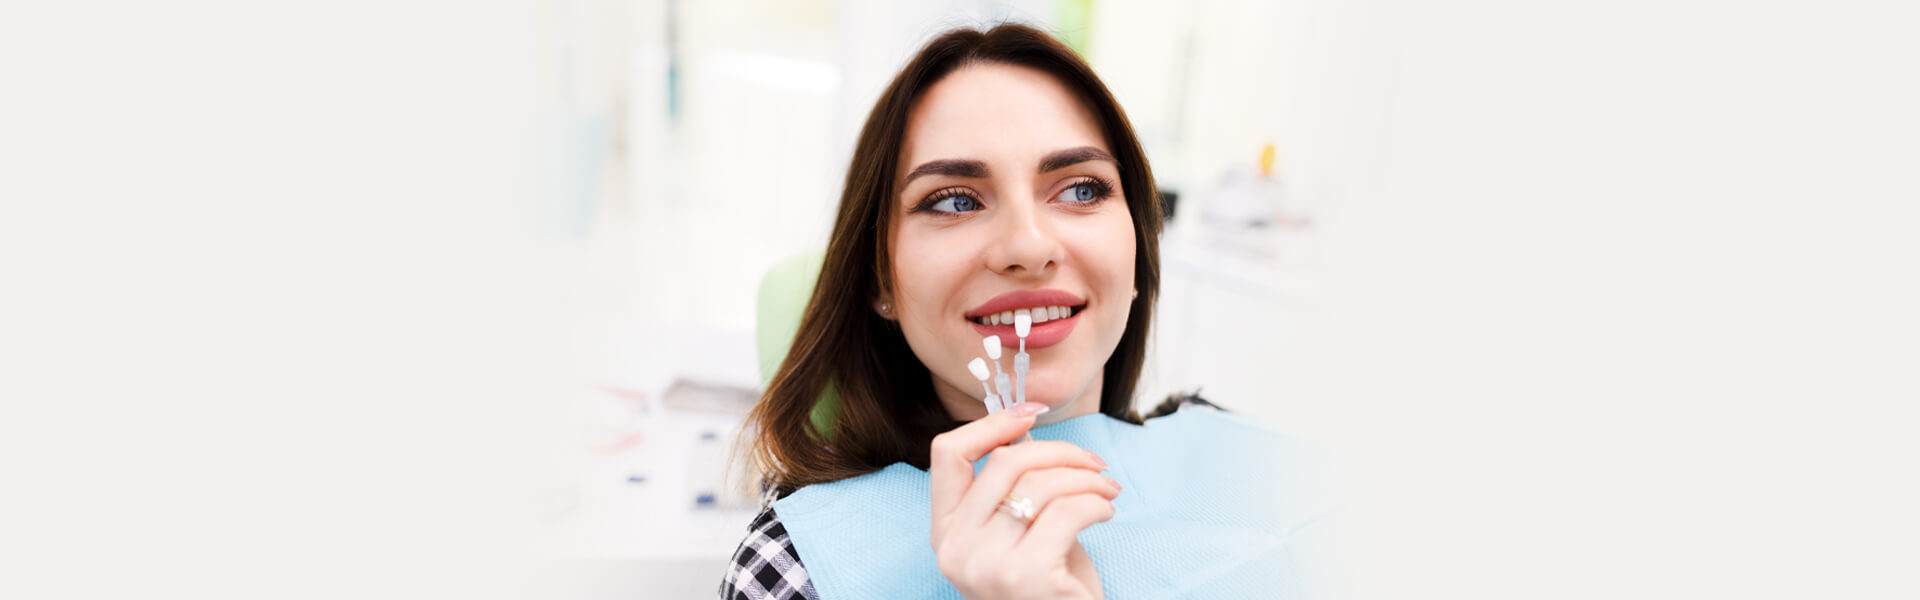 All about Dental Veneers How to Use Them